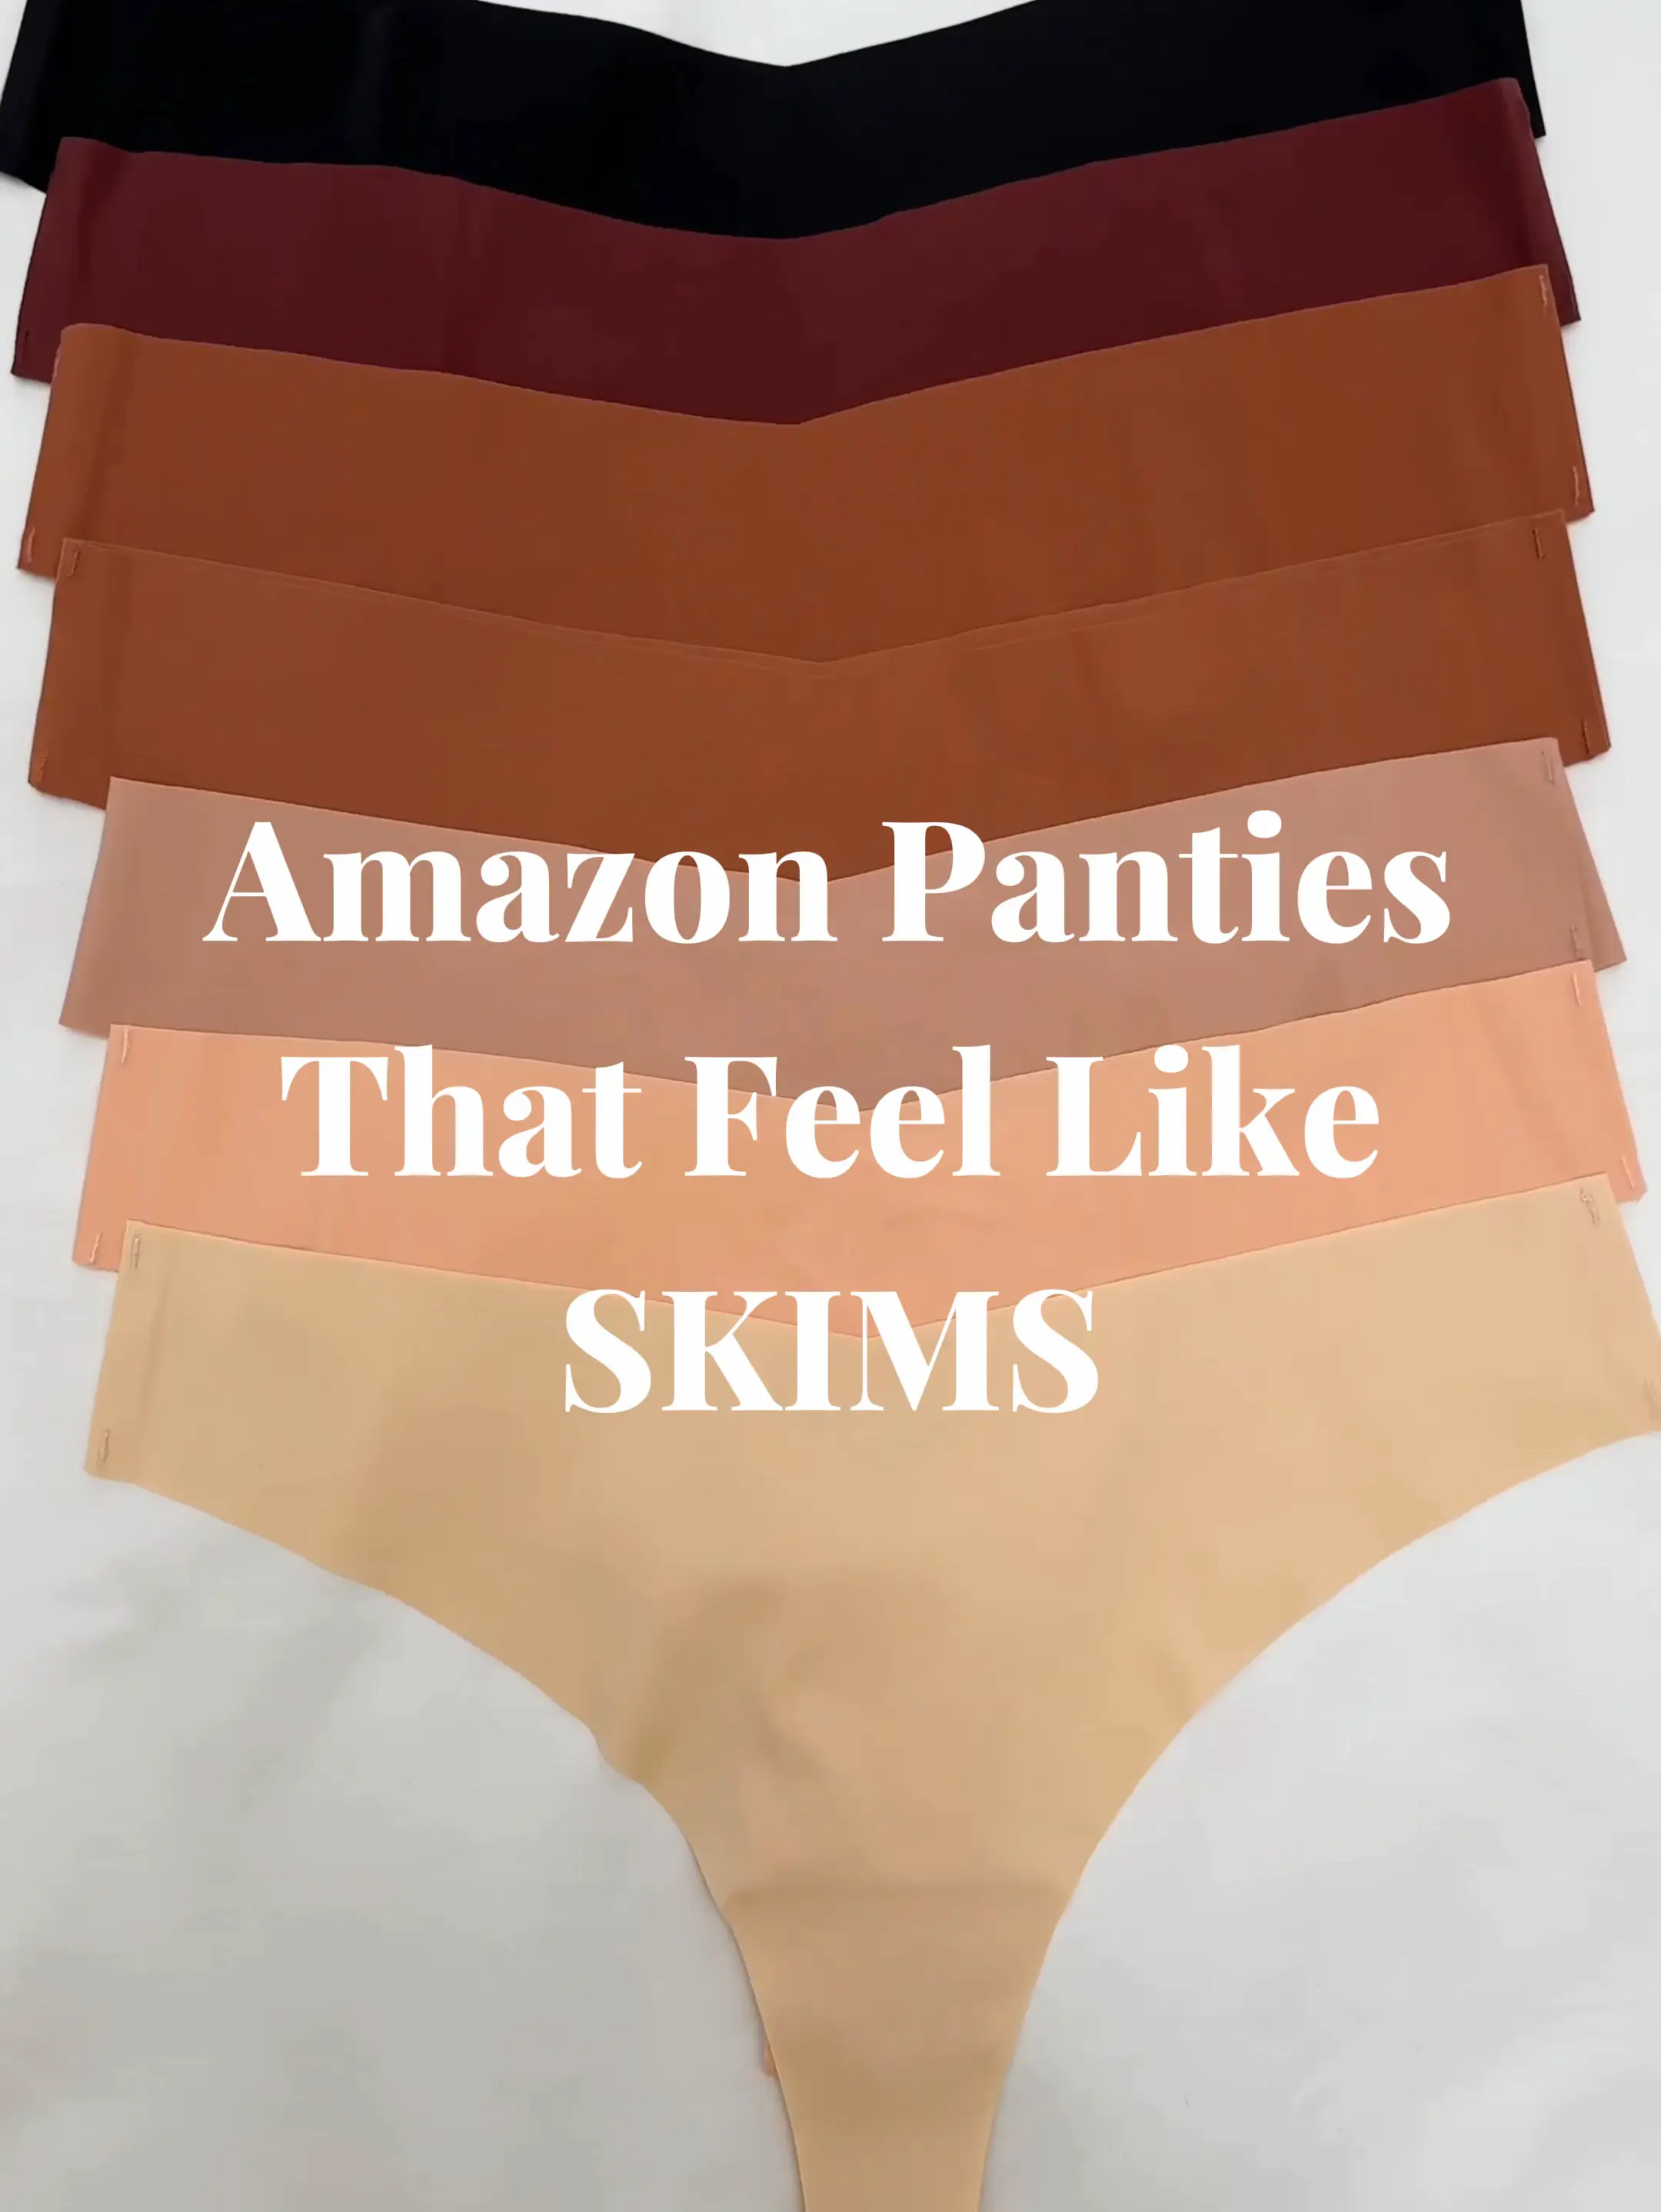 👀🫶🏼 SKIMS-inspired panties!, Video published by HouseofSequins